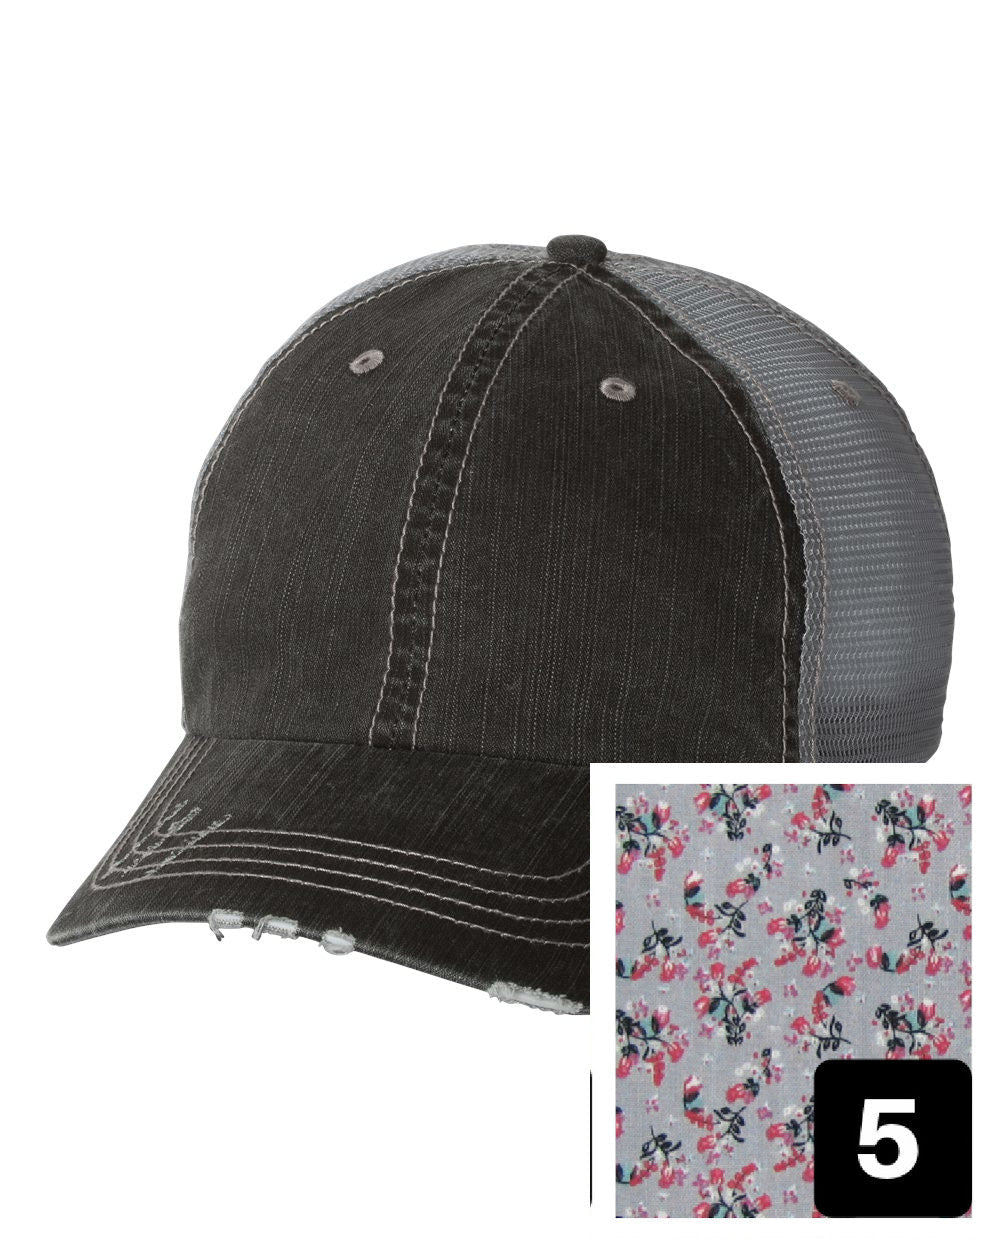 gray distressed trucker hat with purple and pink floral fabric state of Virginia